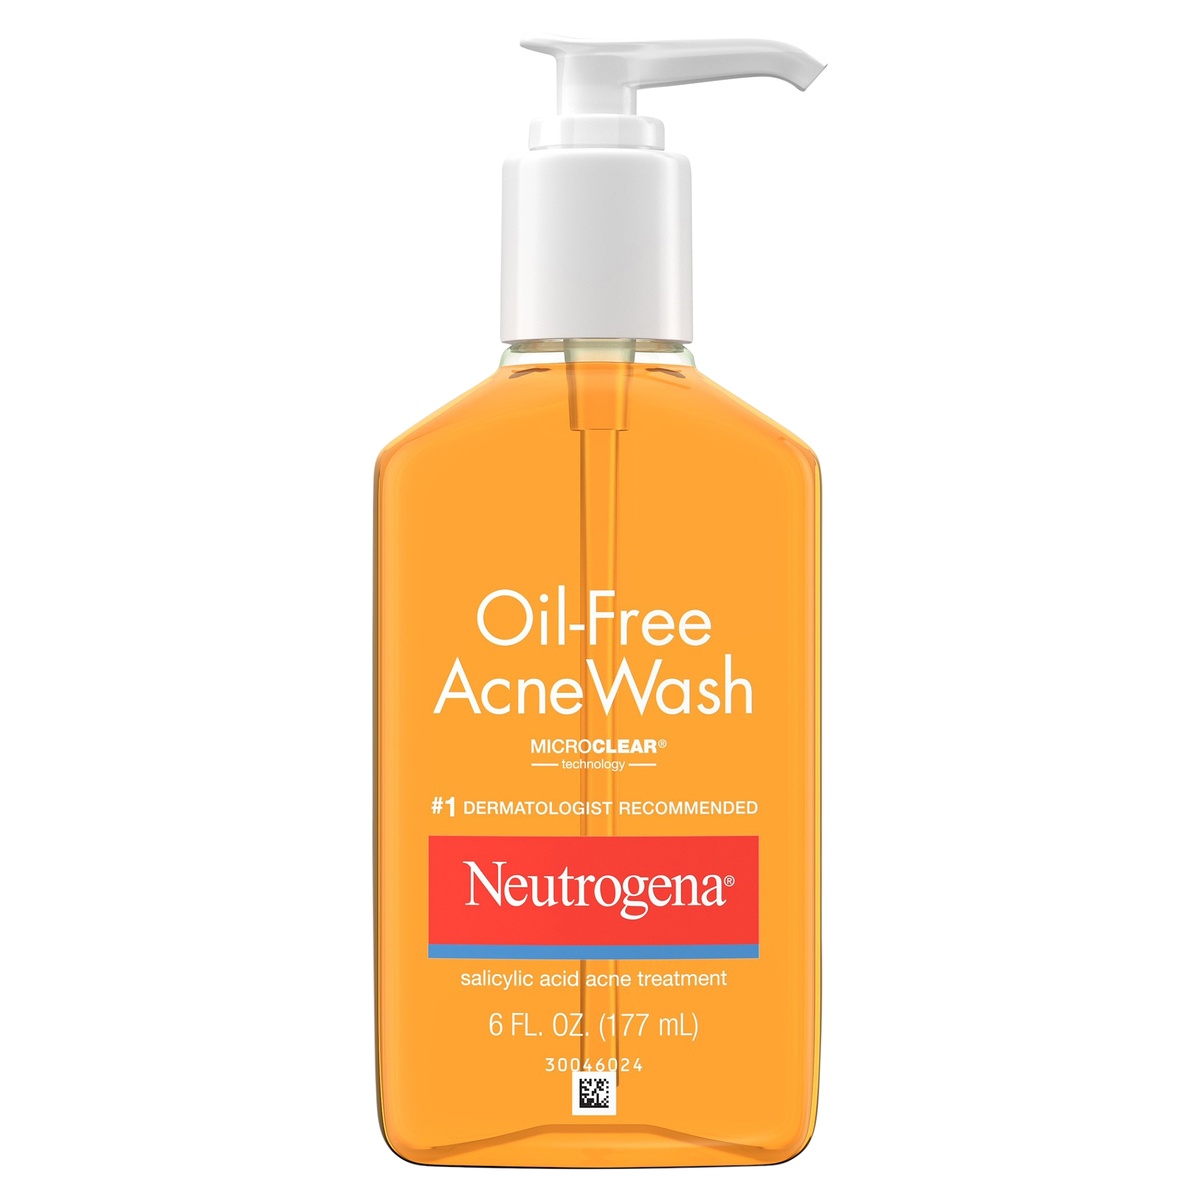 slide 8 of 8, Neutrogena Oil-Free Acne Fighting Facial Cleanser, 2% Salicylic Acid Acne Treatment, Daily Oil-Free Acne Face Wash for Acne-Prone Skin with Salicylic Acid Acne Medicine, 6 oz